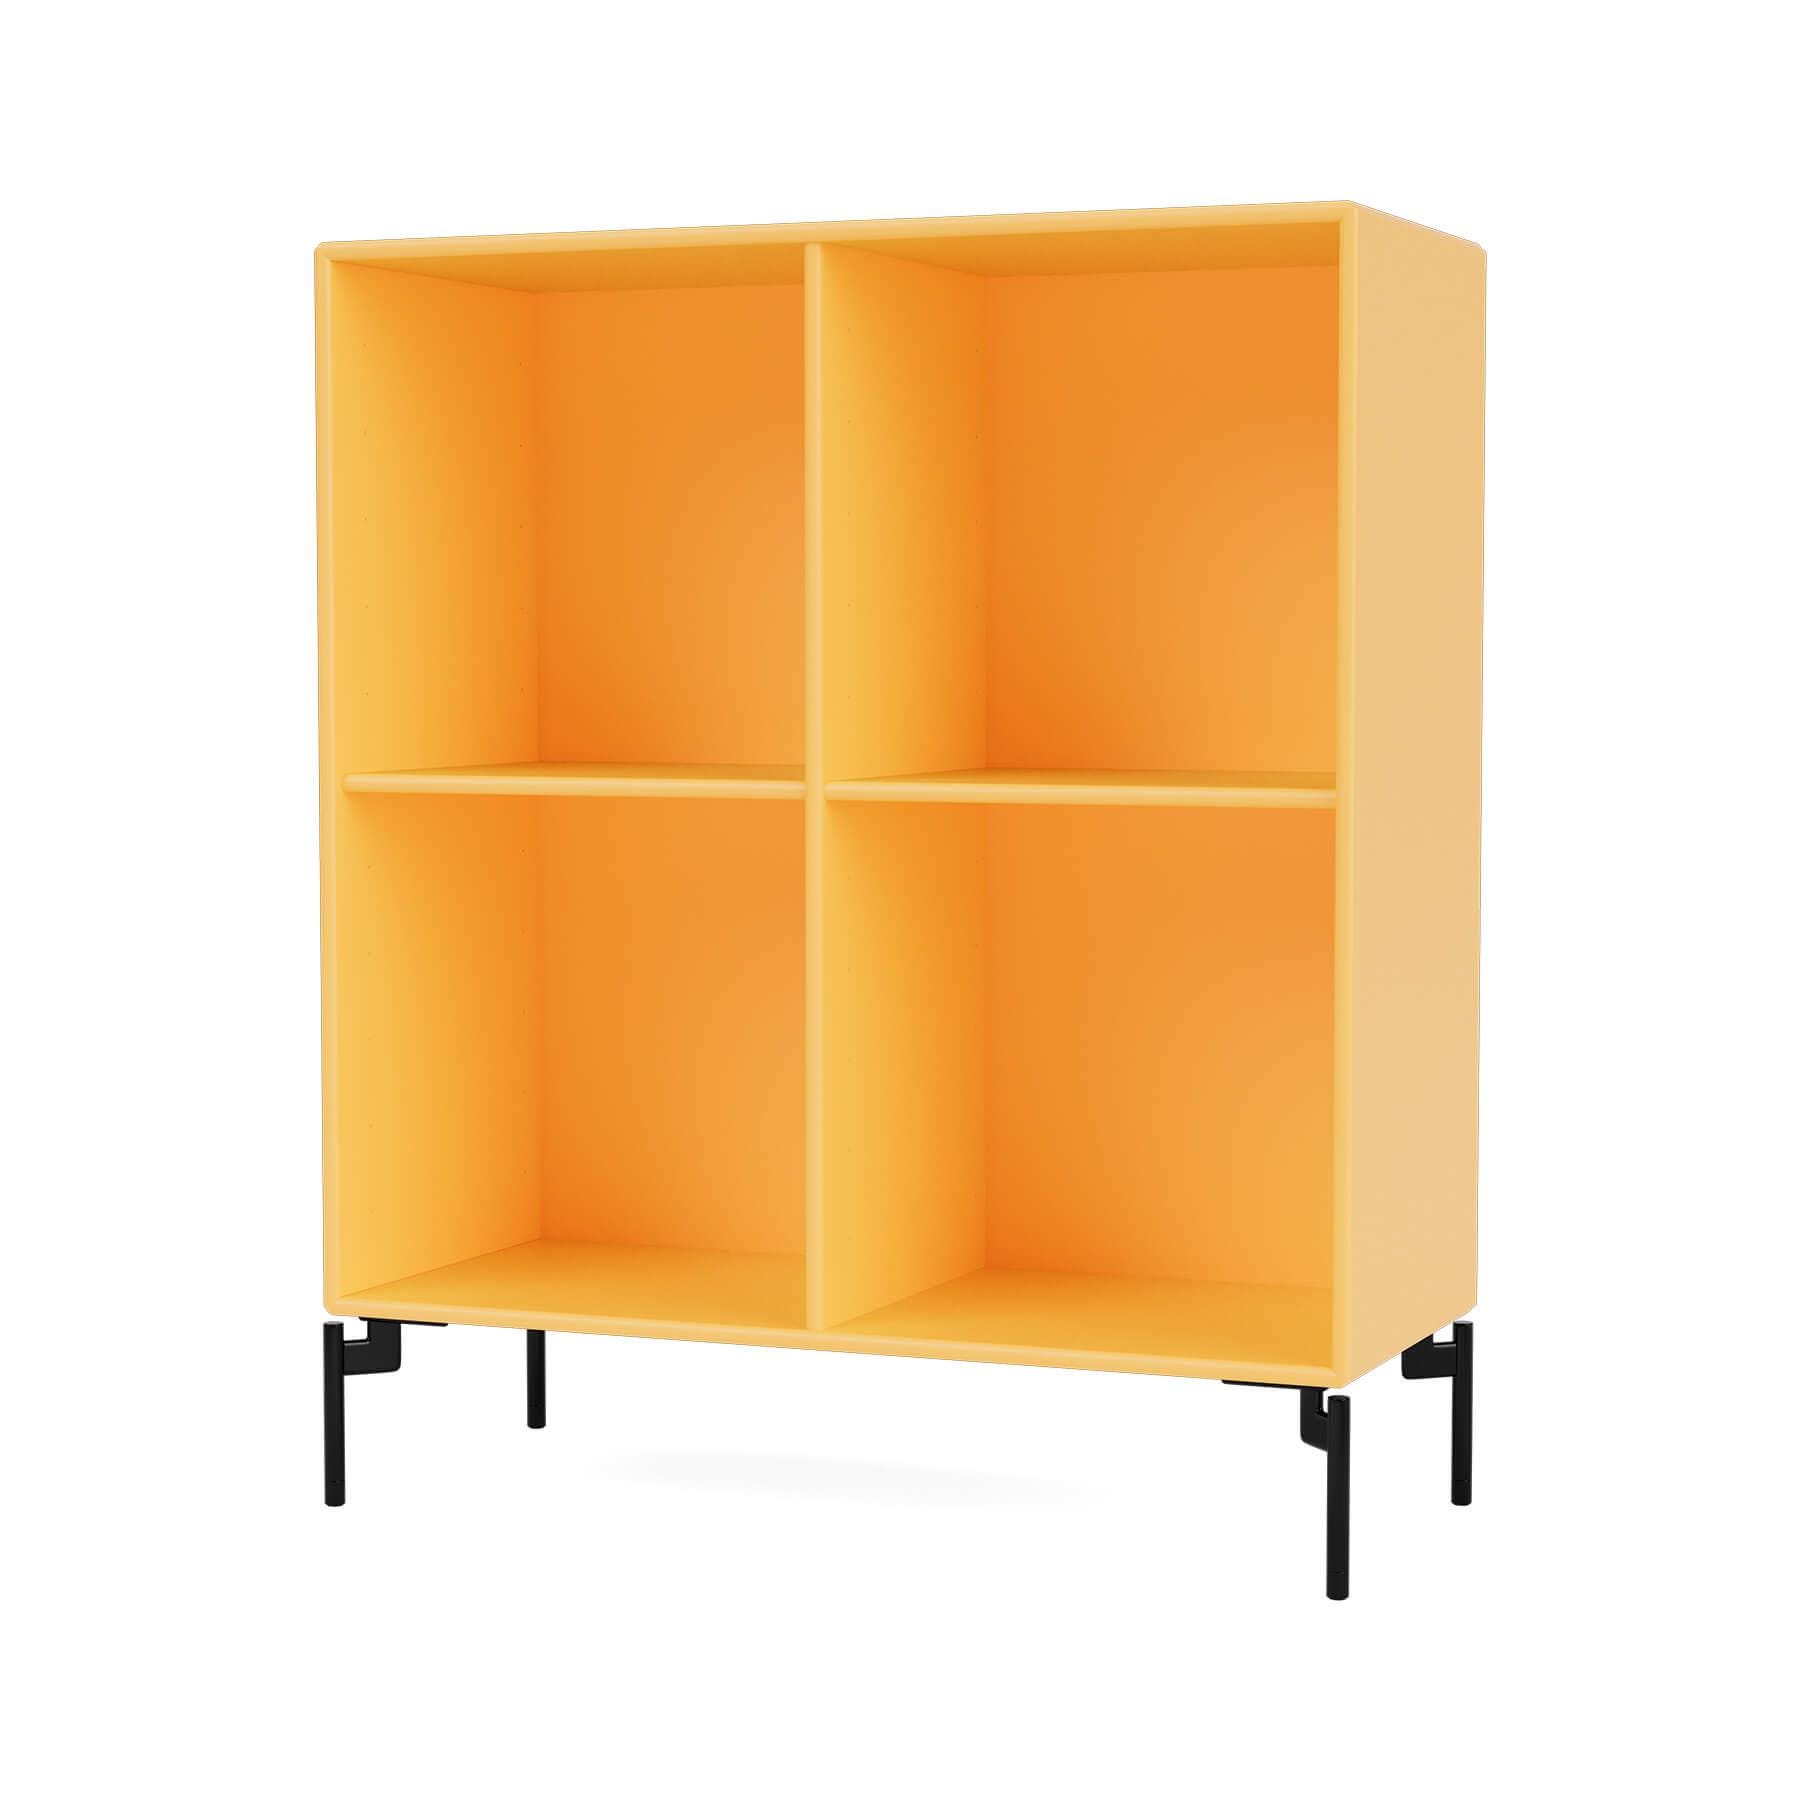 Montana Show Bookcase Acacia Black Legs Yellow Designer Furniture From Holloways Of Ludlow